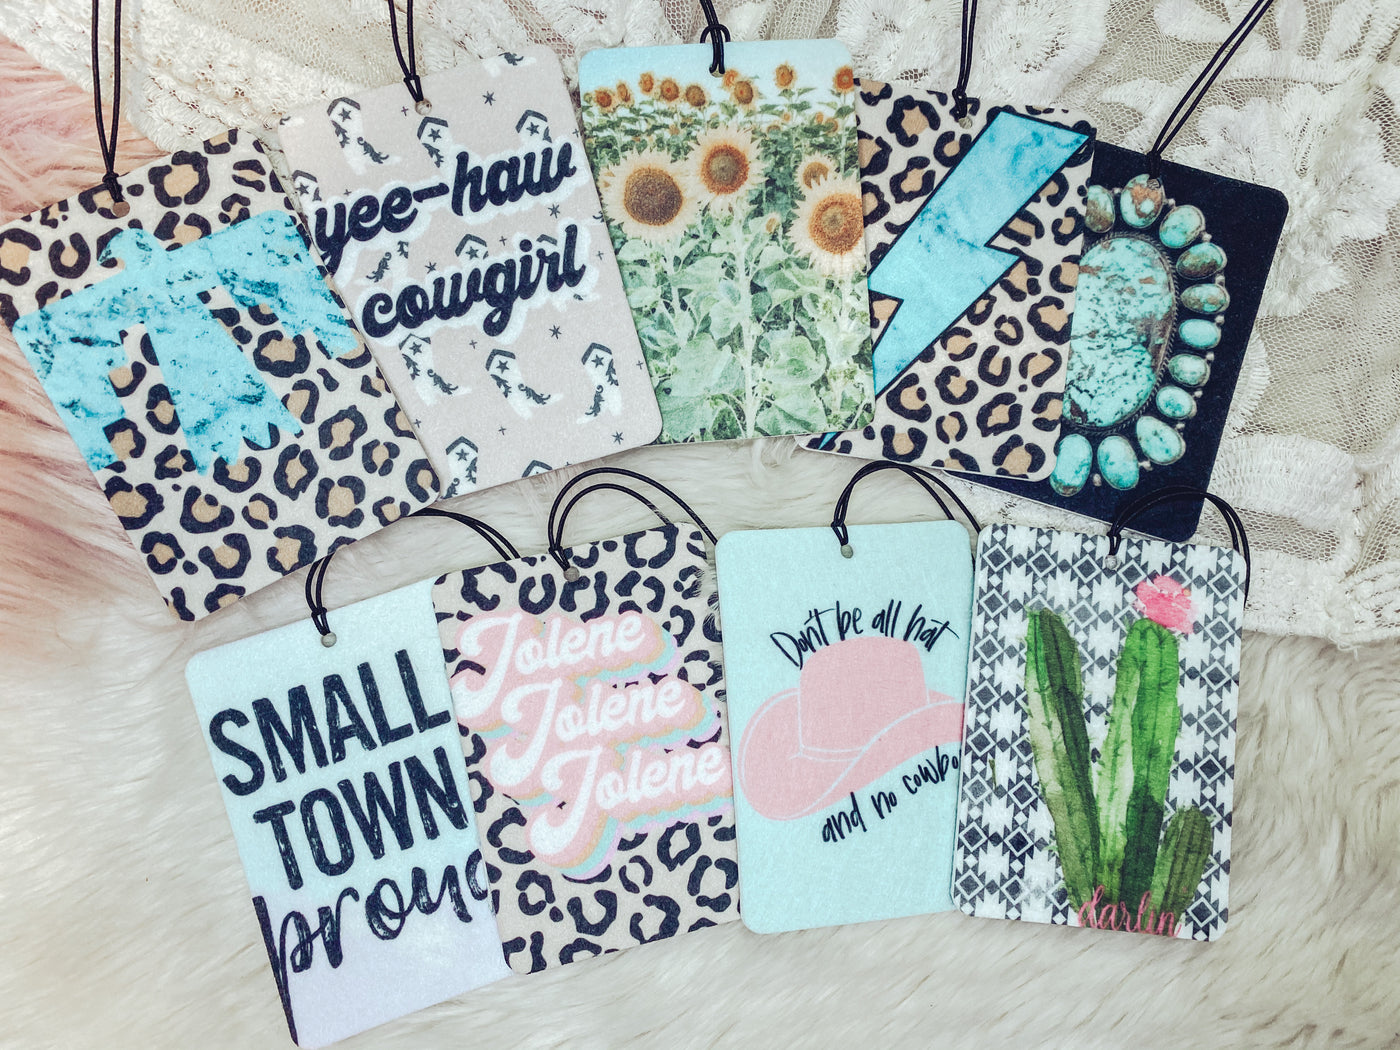 Small Town Proud - Car Charm-401 CAR ACCESSORIES-Adelyn Elaine's-Adelyn Elaine's Boutique, Women's Clothing Boutique in Gilmer, TX